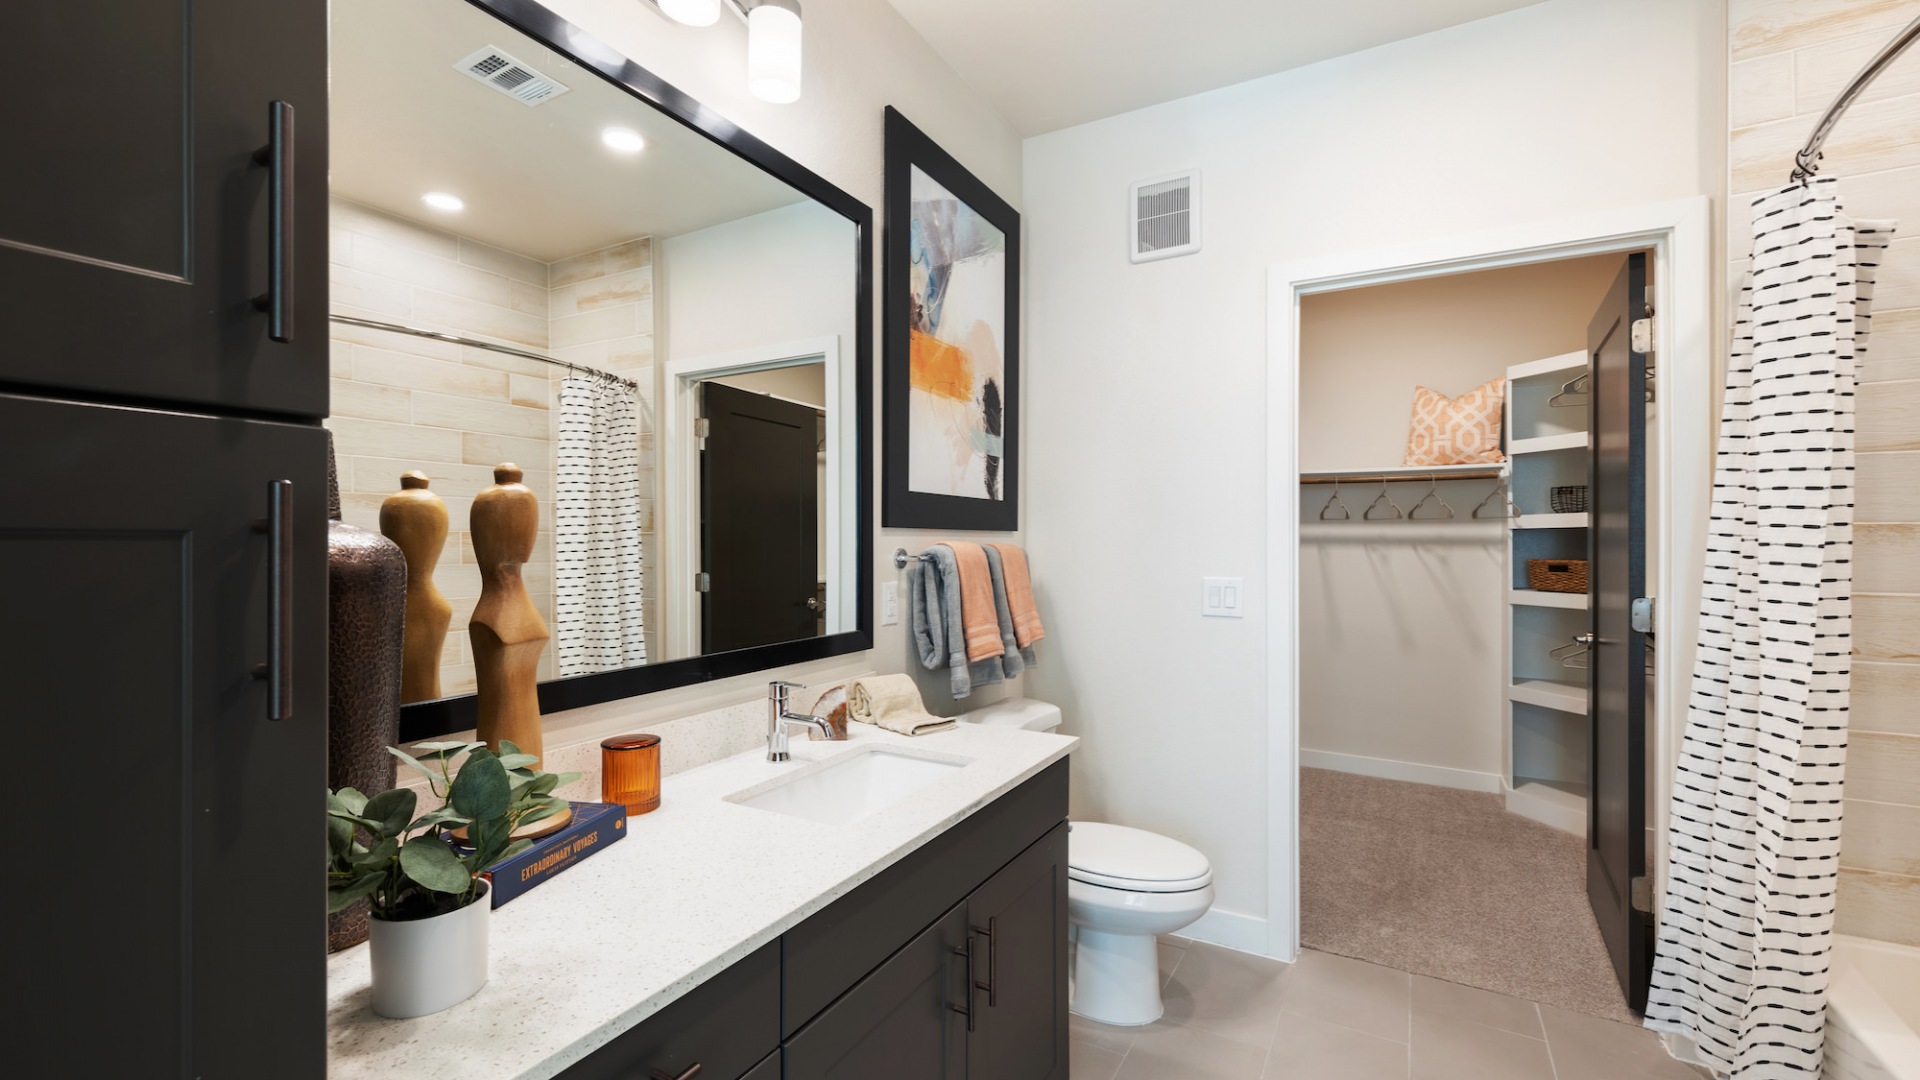 Model bathroom at our apartments in Houston, TX, featuring tiled flooring and a view of the walk in closet.